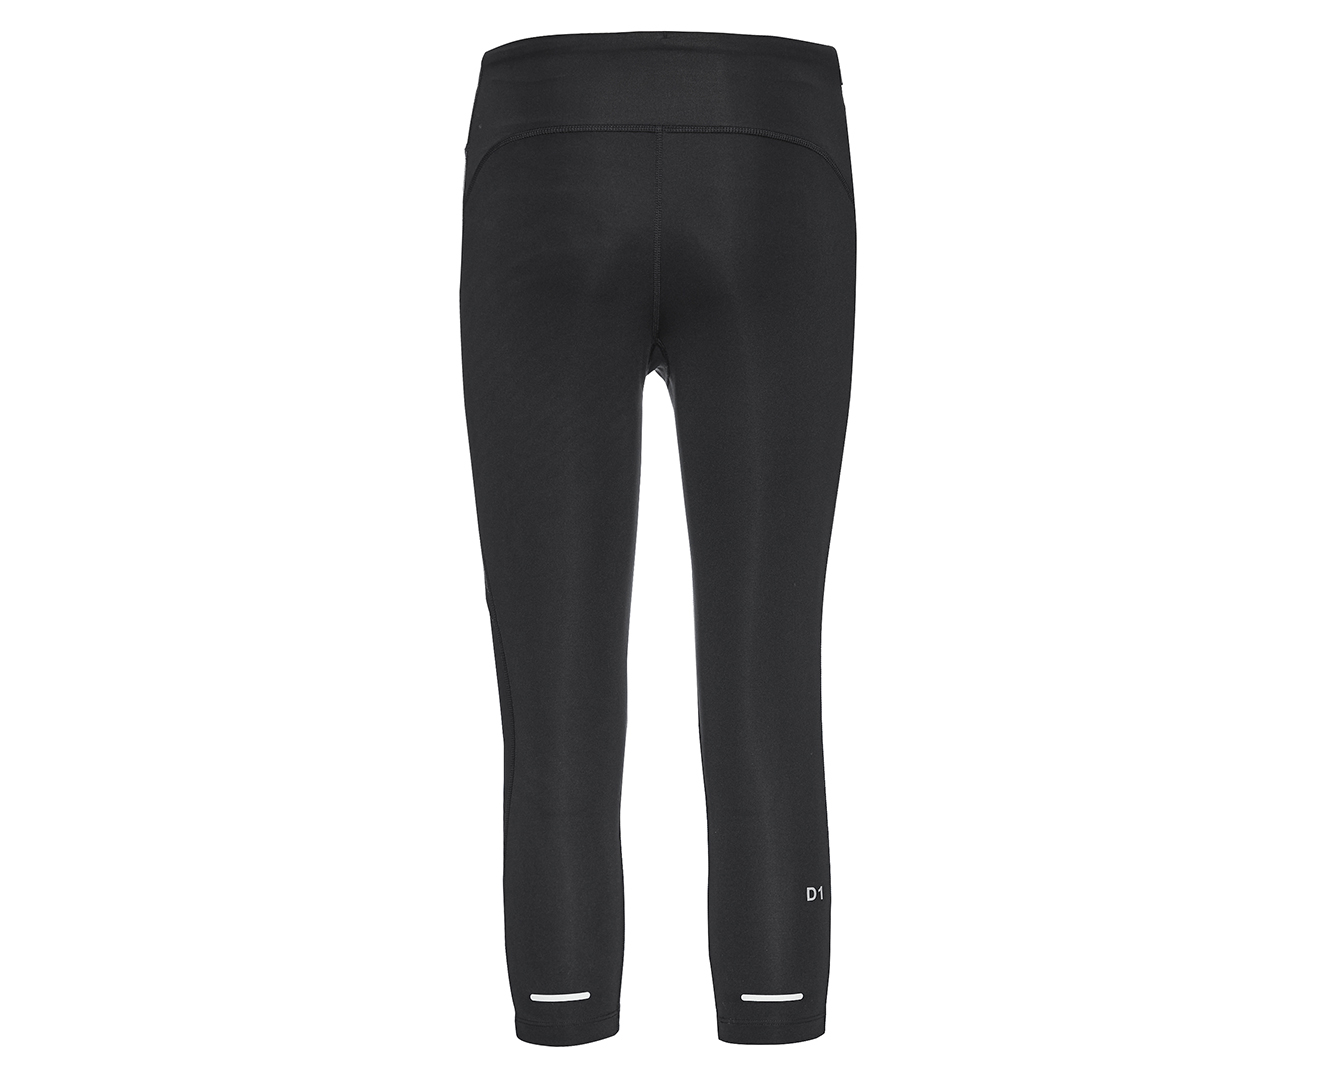 Nike Go Womens Firm Support High-Waisted Capri Tights